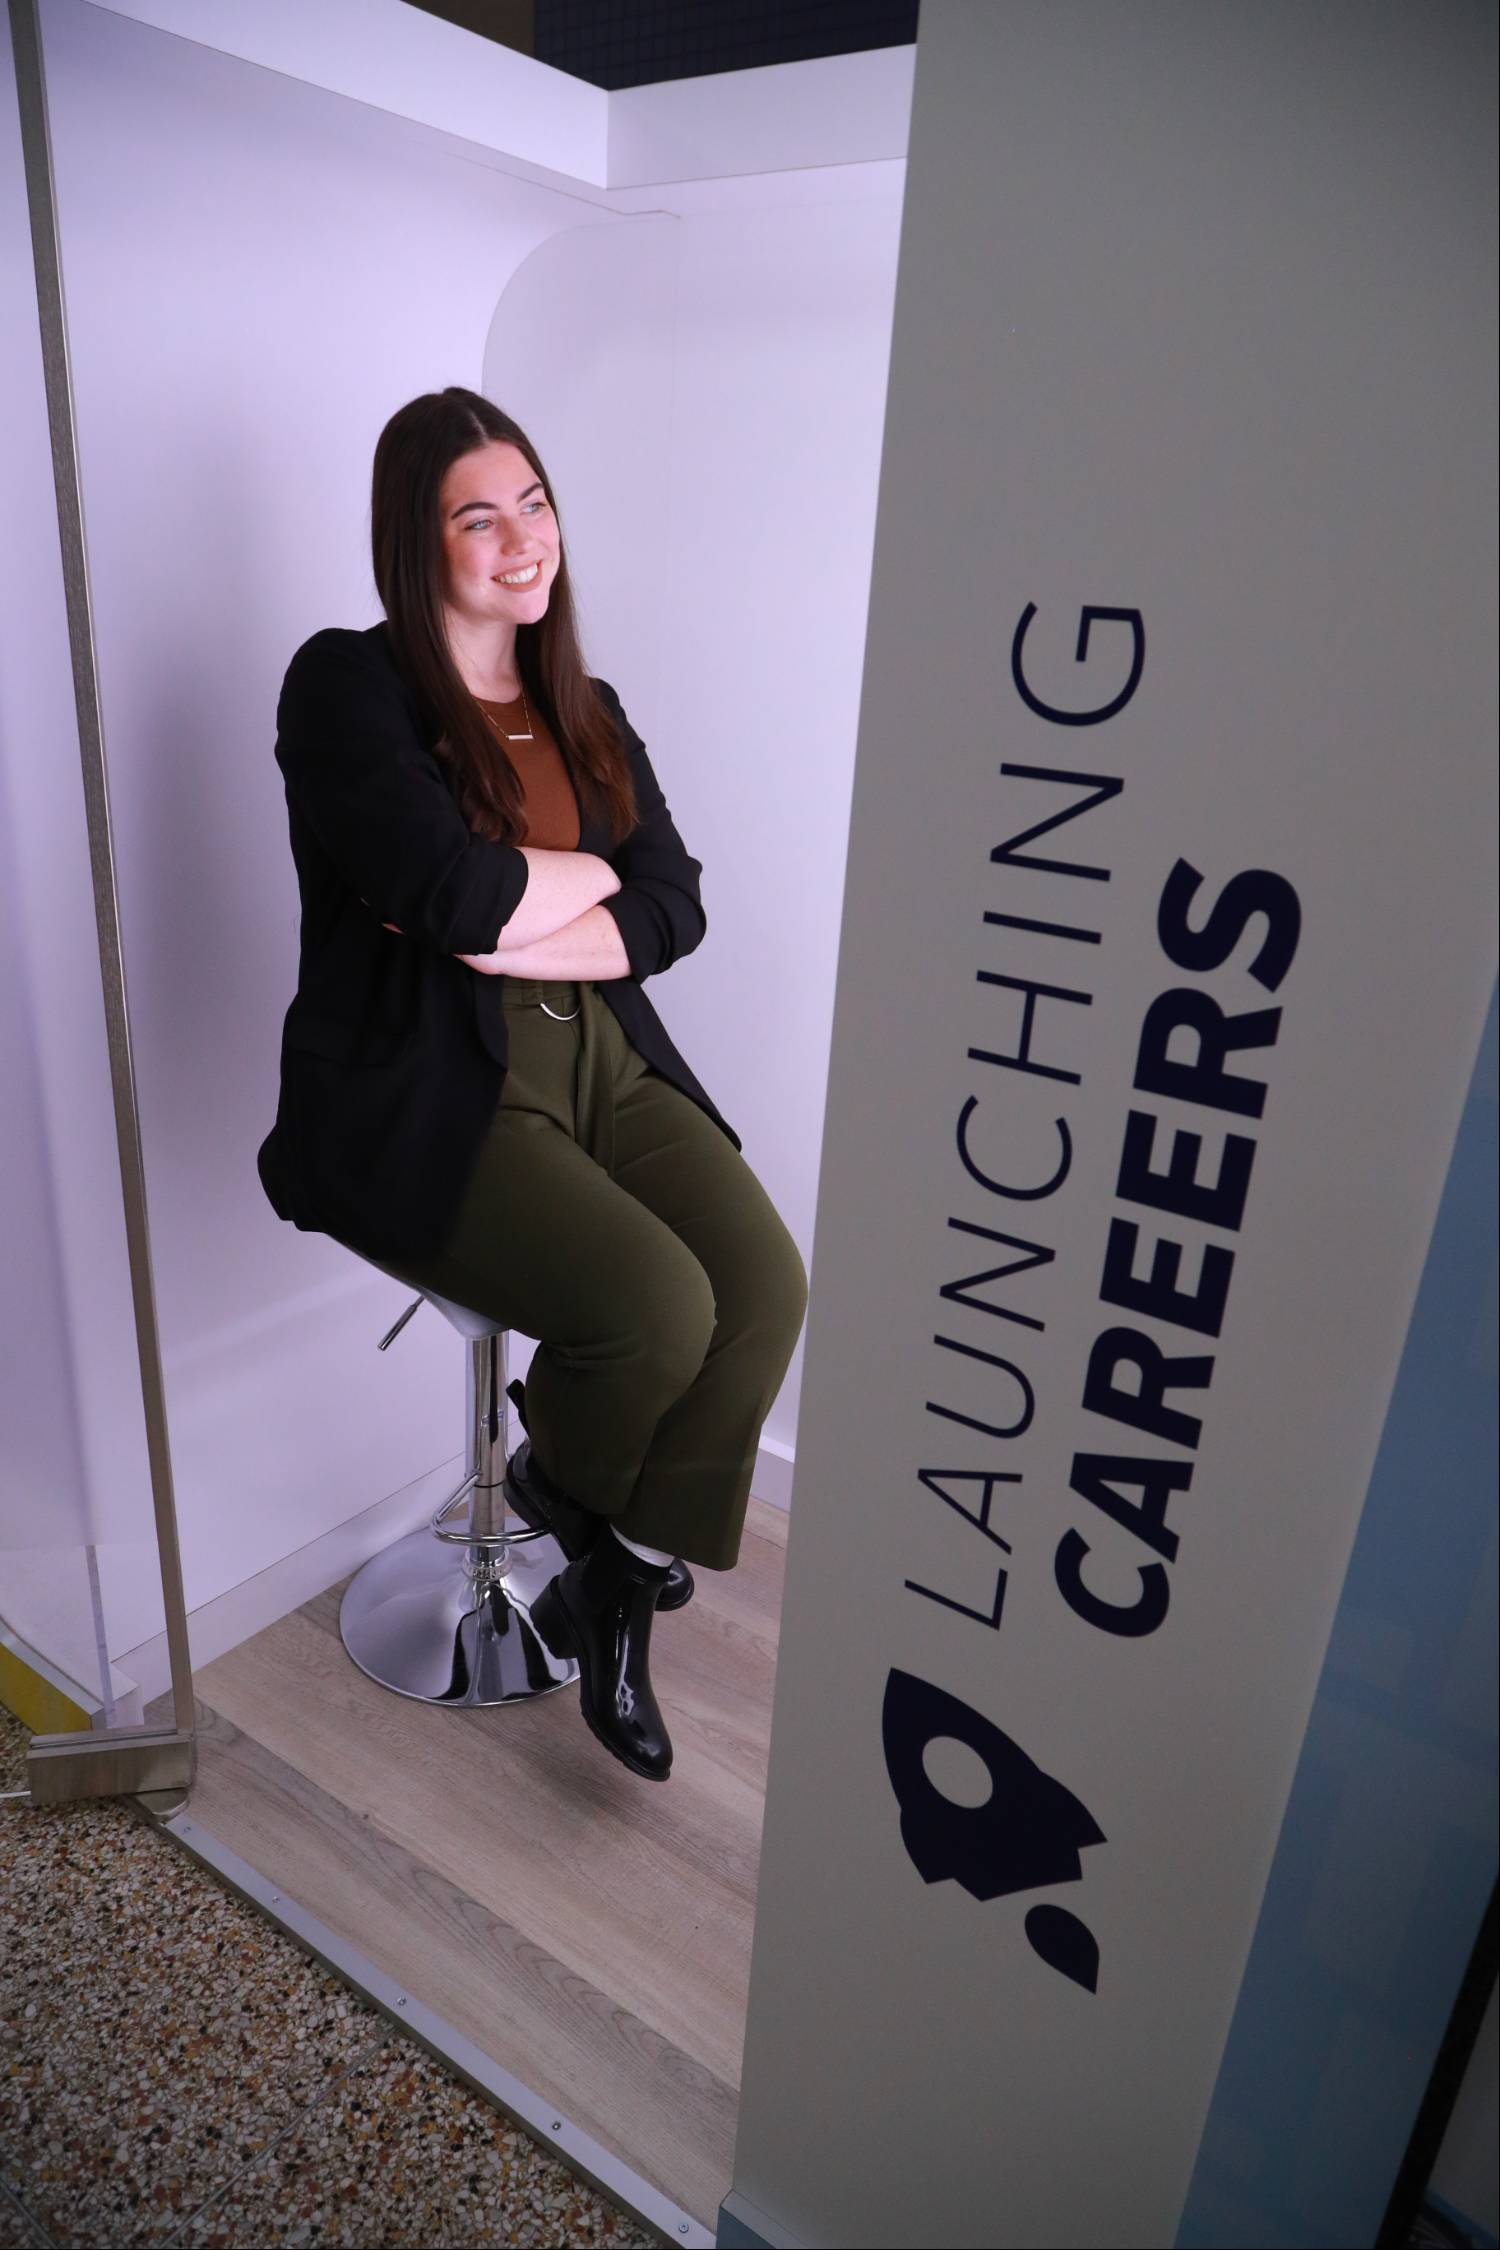 Anna Redd, communication studies major, poses for headshot in the professional headshot booth.